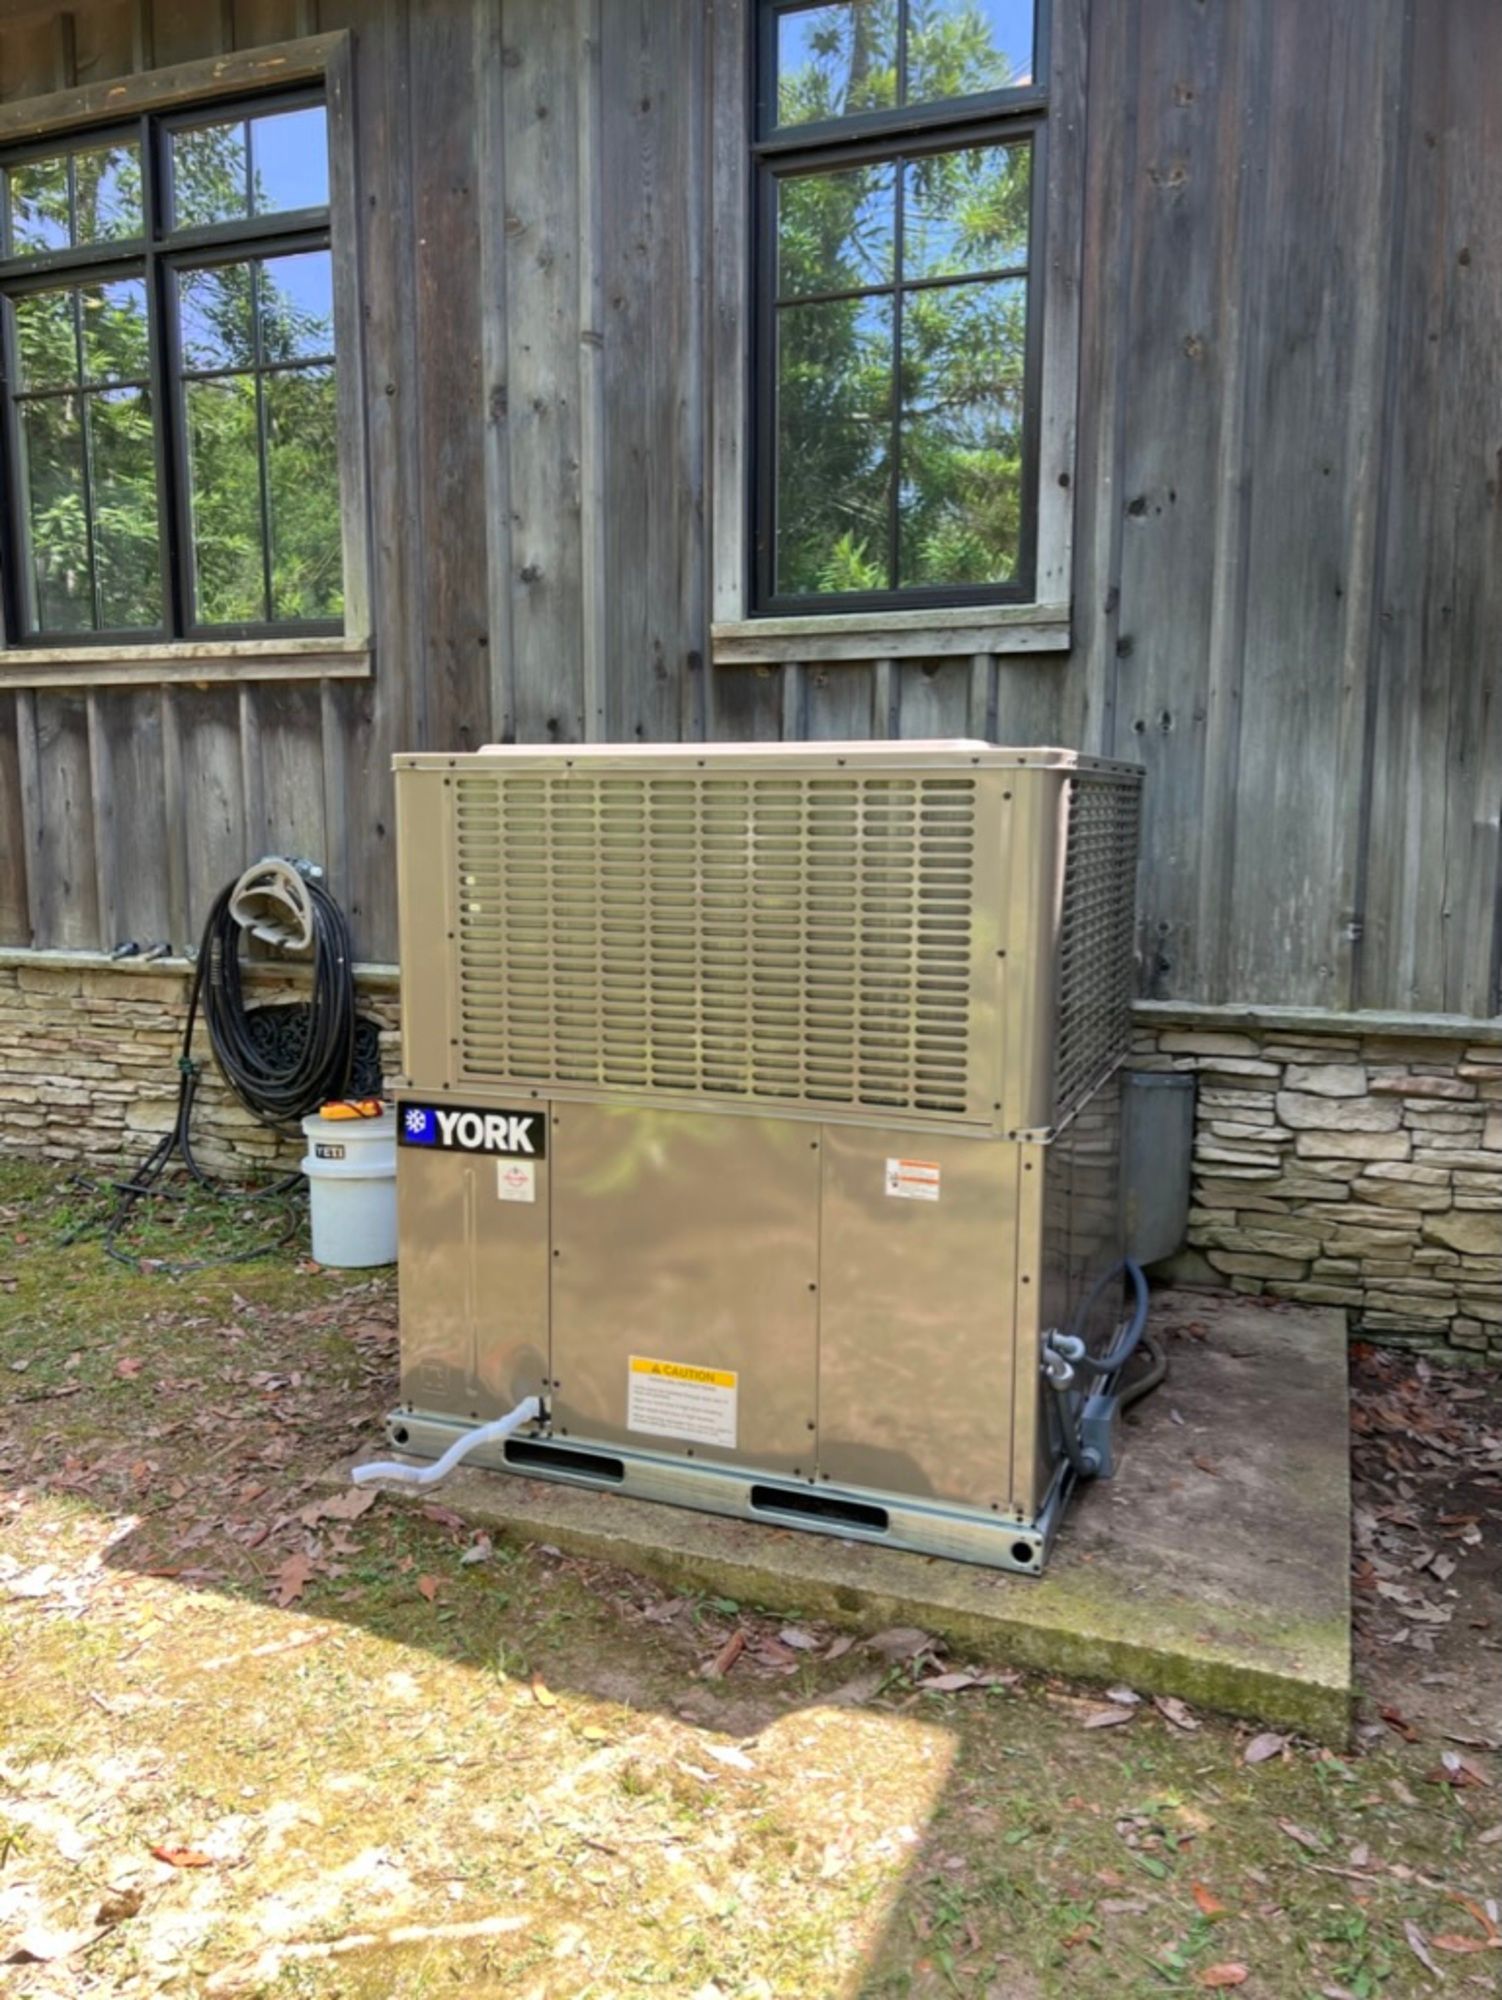 A york air conditioner is sitting outside of a wooden building.